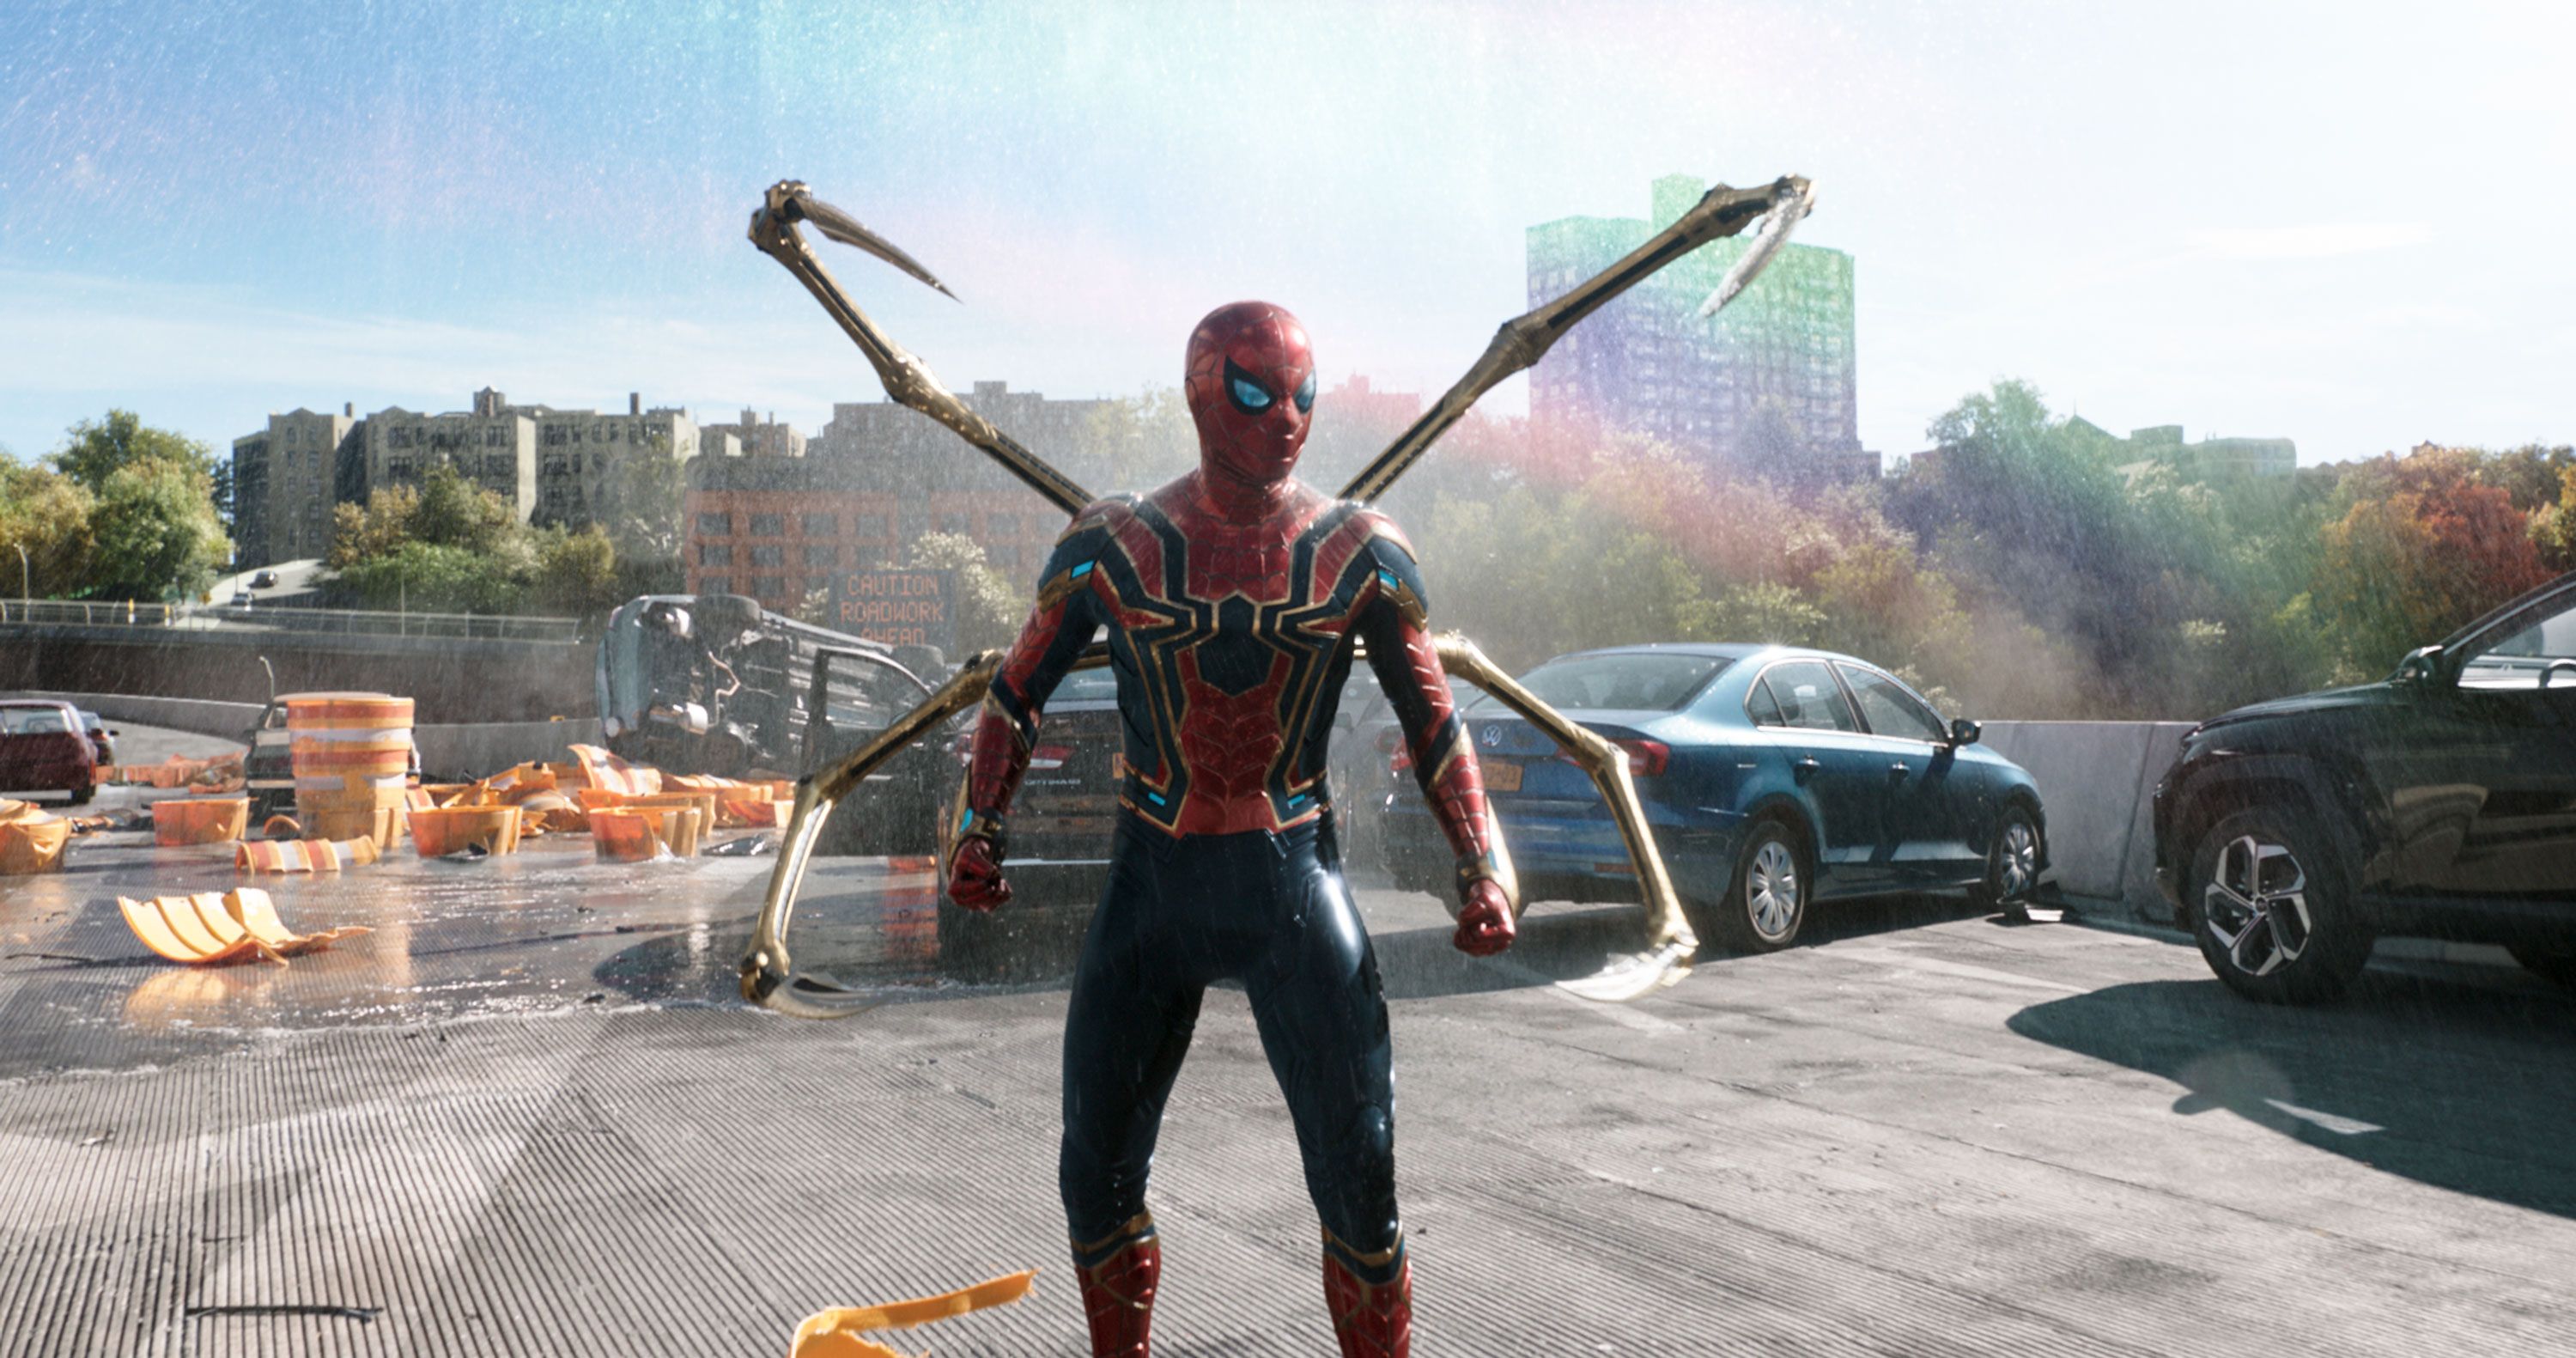 Marvel's 'Spider-Man: No Way Home' is too much, and I'm not mad at